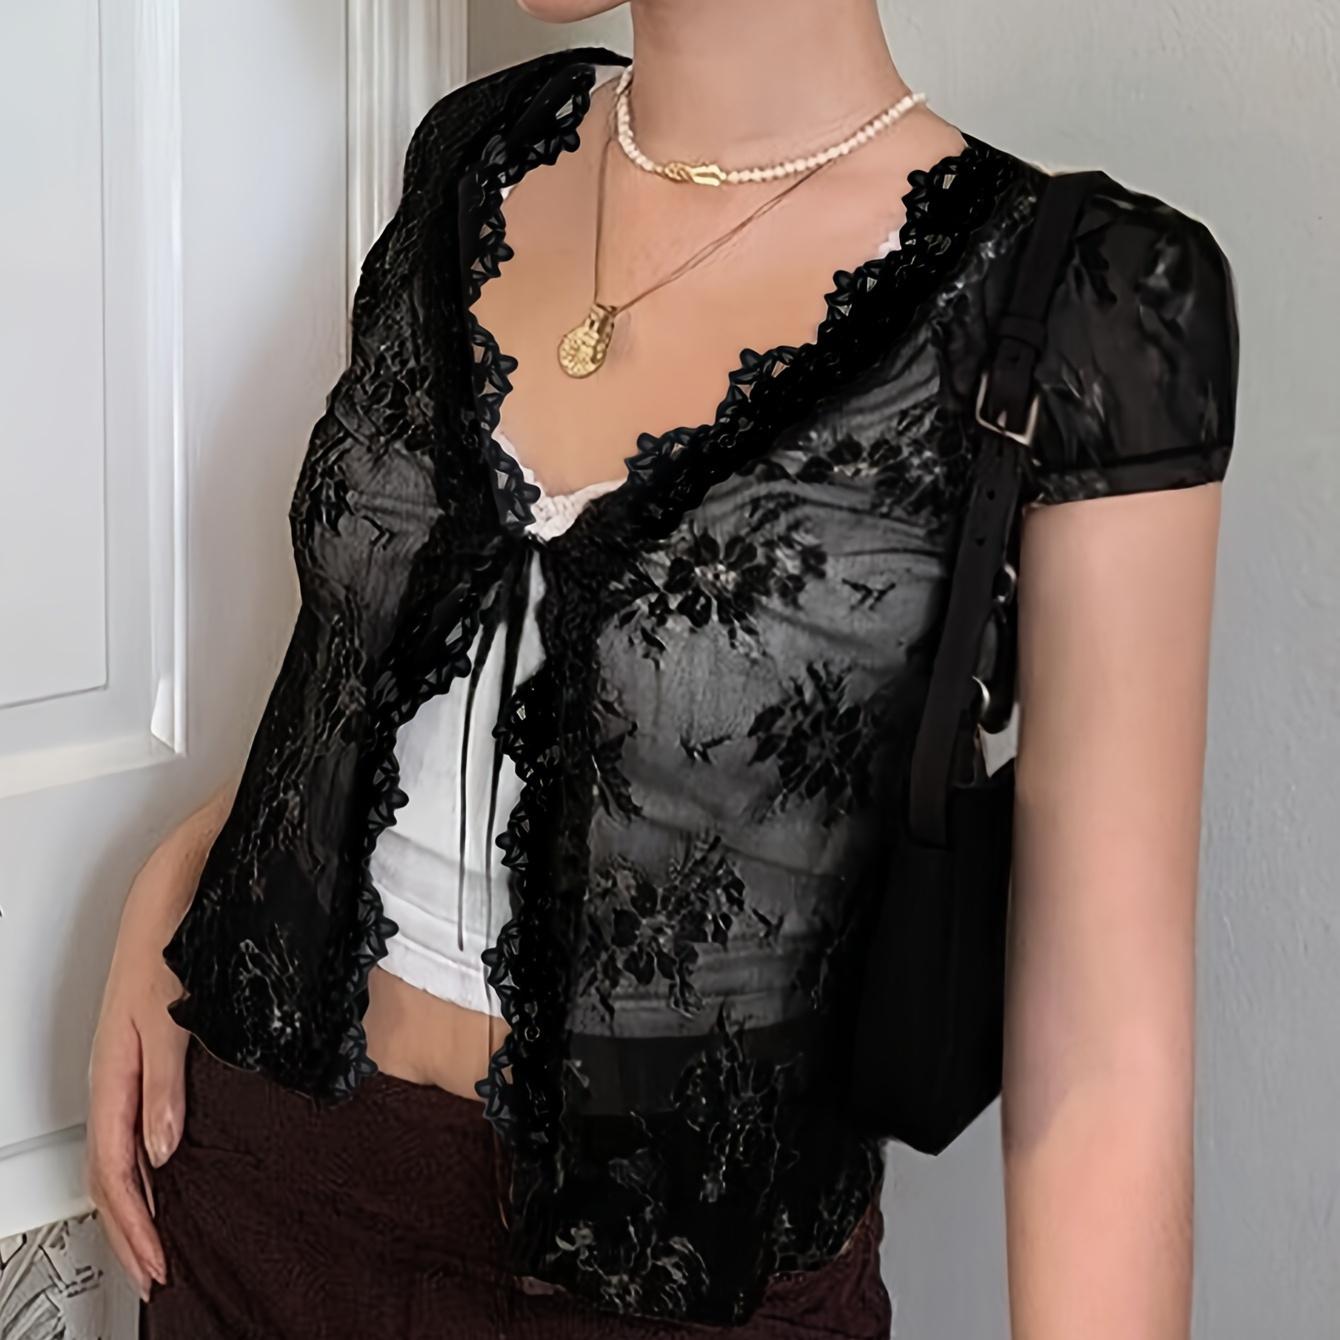 

Contrast Lace Knotted Front Crop Cardigan, Y2k See Through Sheer Short Sleeve Cover Up Top, Women's Clothing